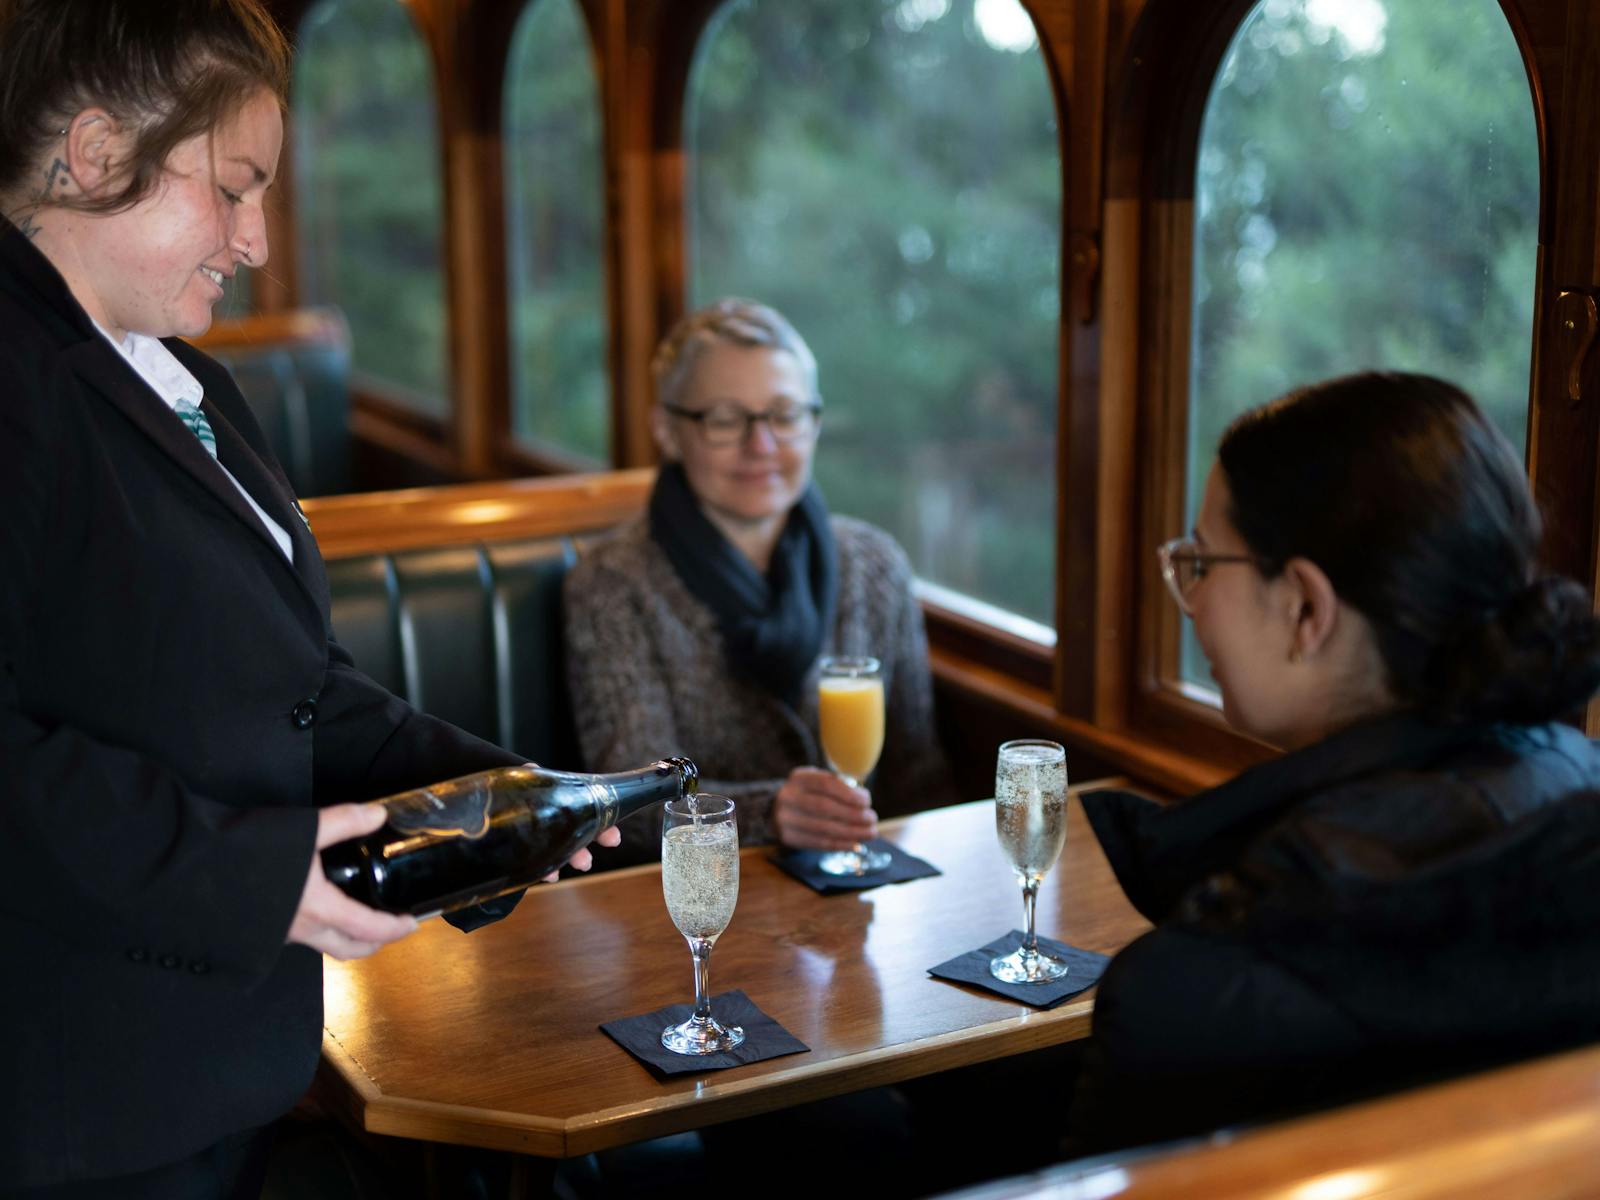 Staff member pours sparkling wine for passengers onboard the wilderness carriage